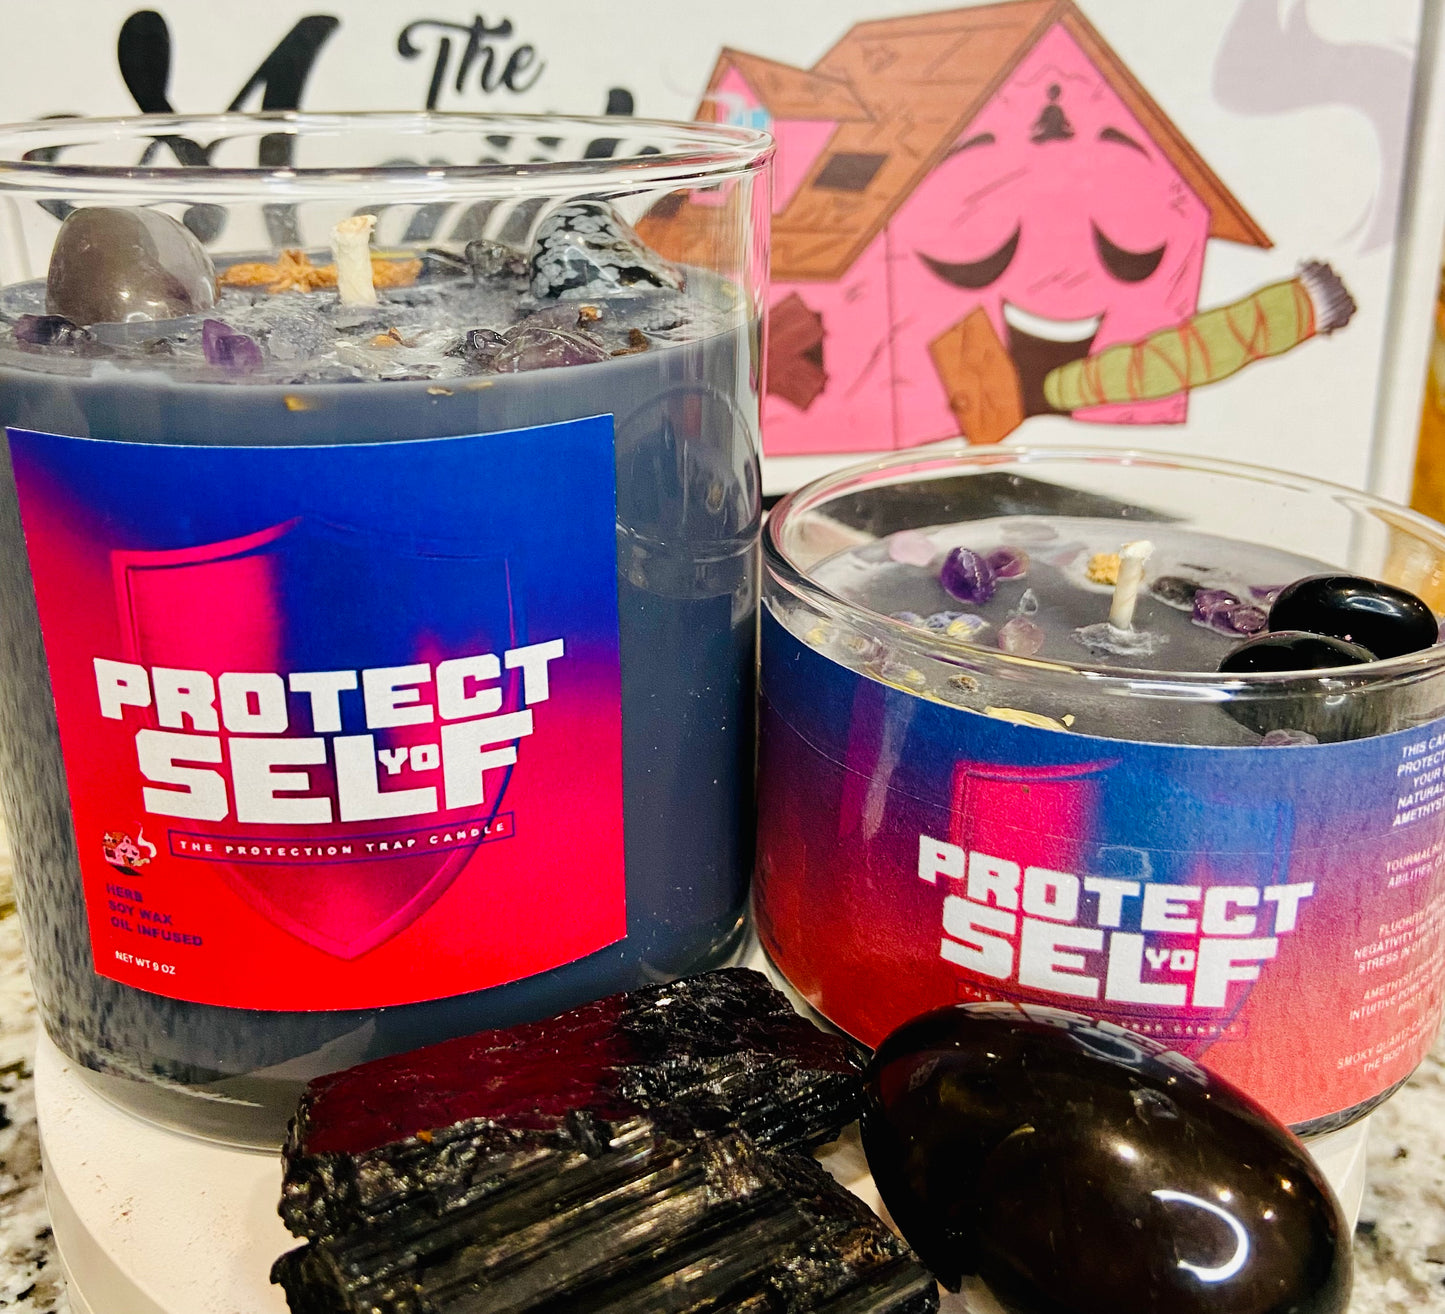 "Protect Yo Self" Clearing and Protection Trap Candle